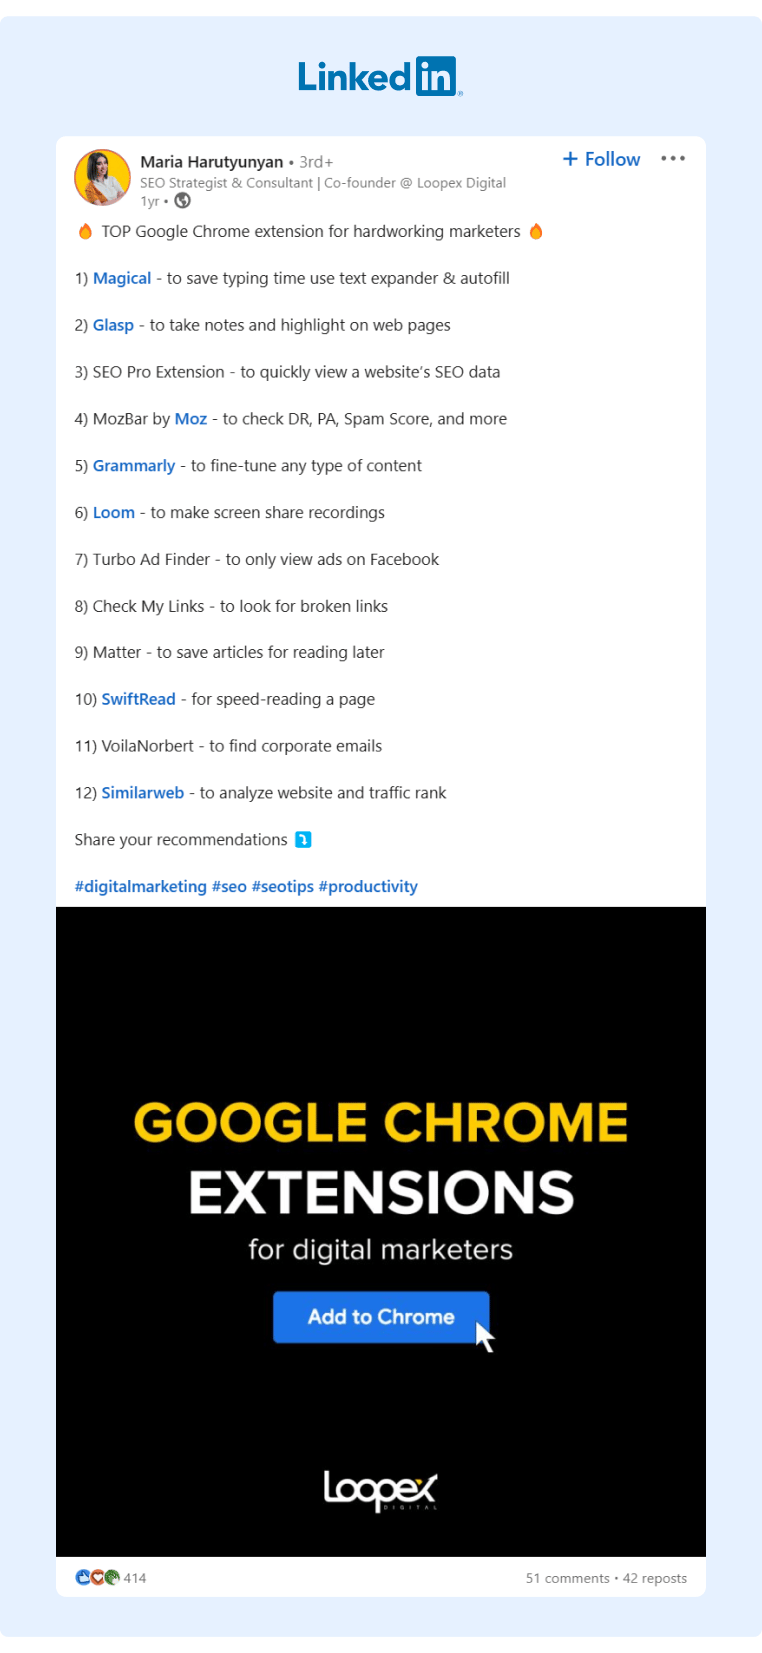 Loopex SEO posted a list of the top Google Chrome extensions for Marketers